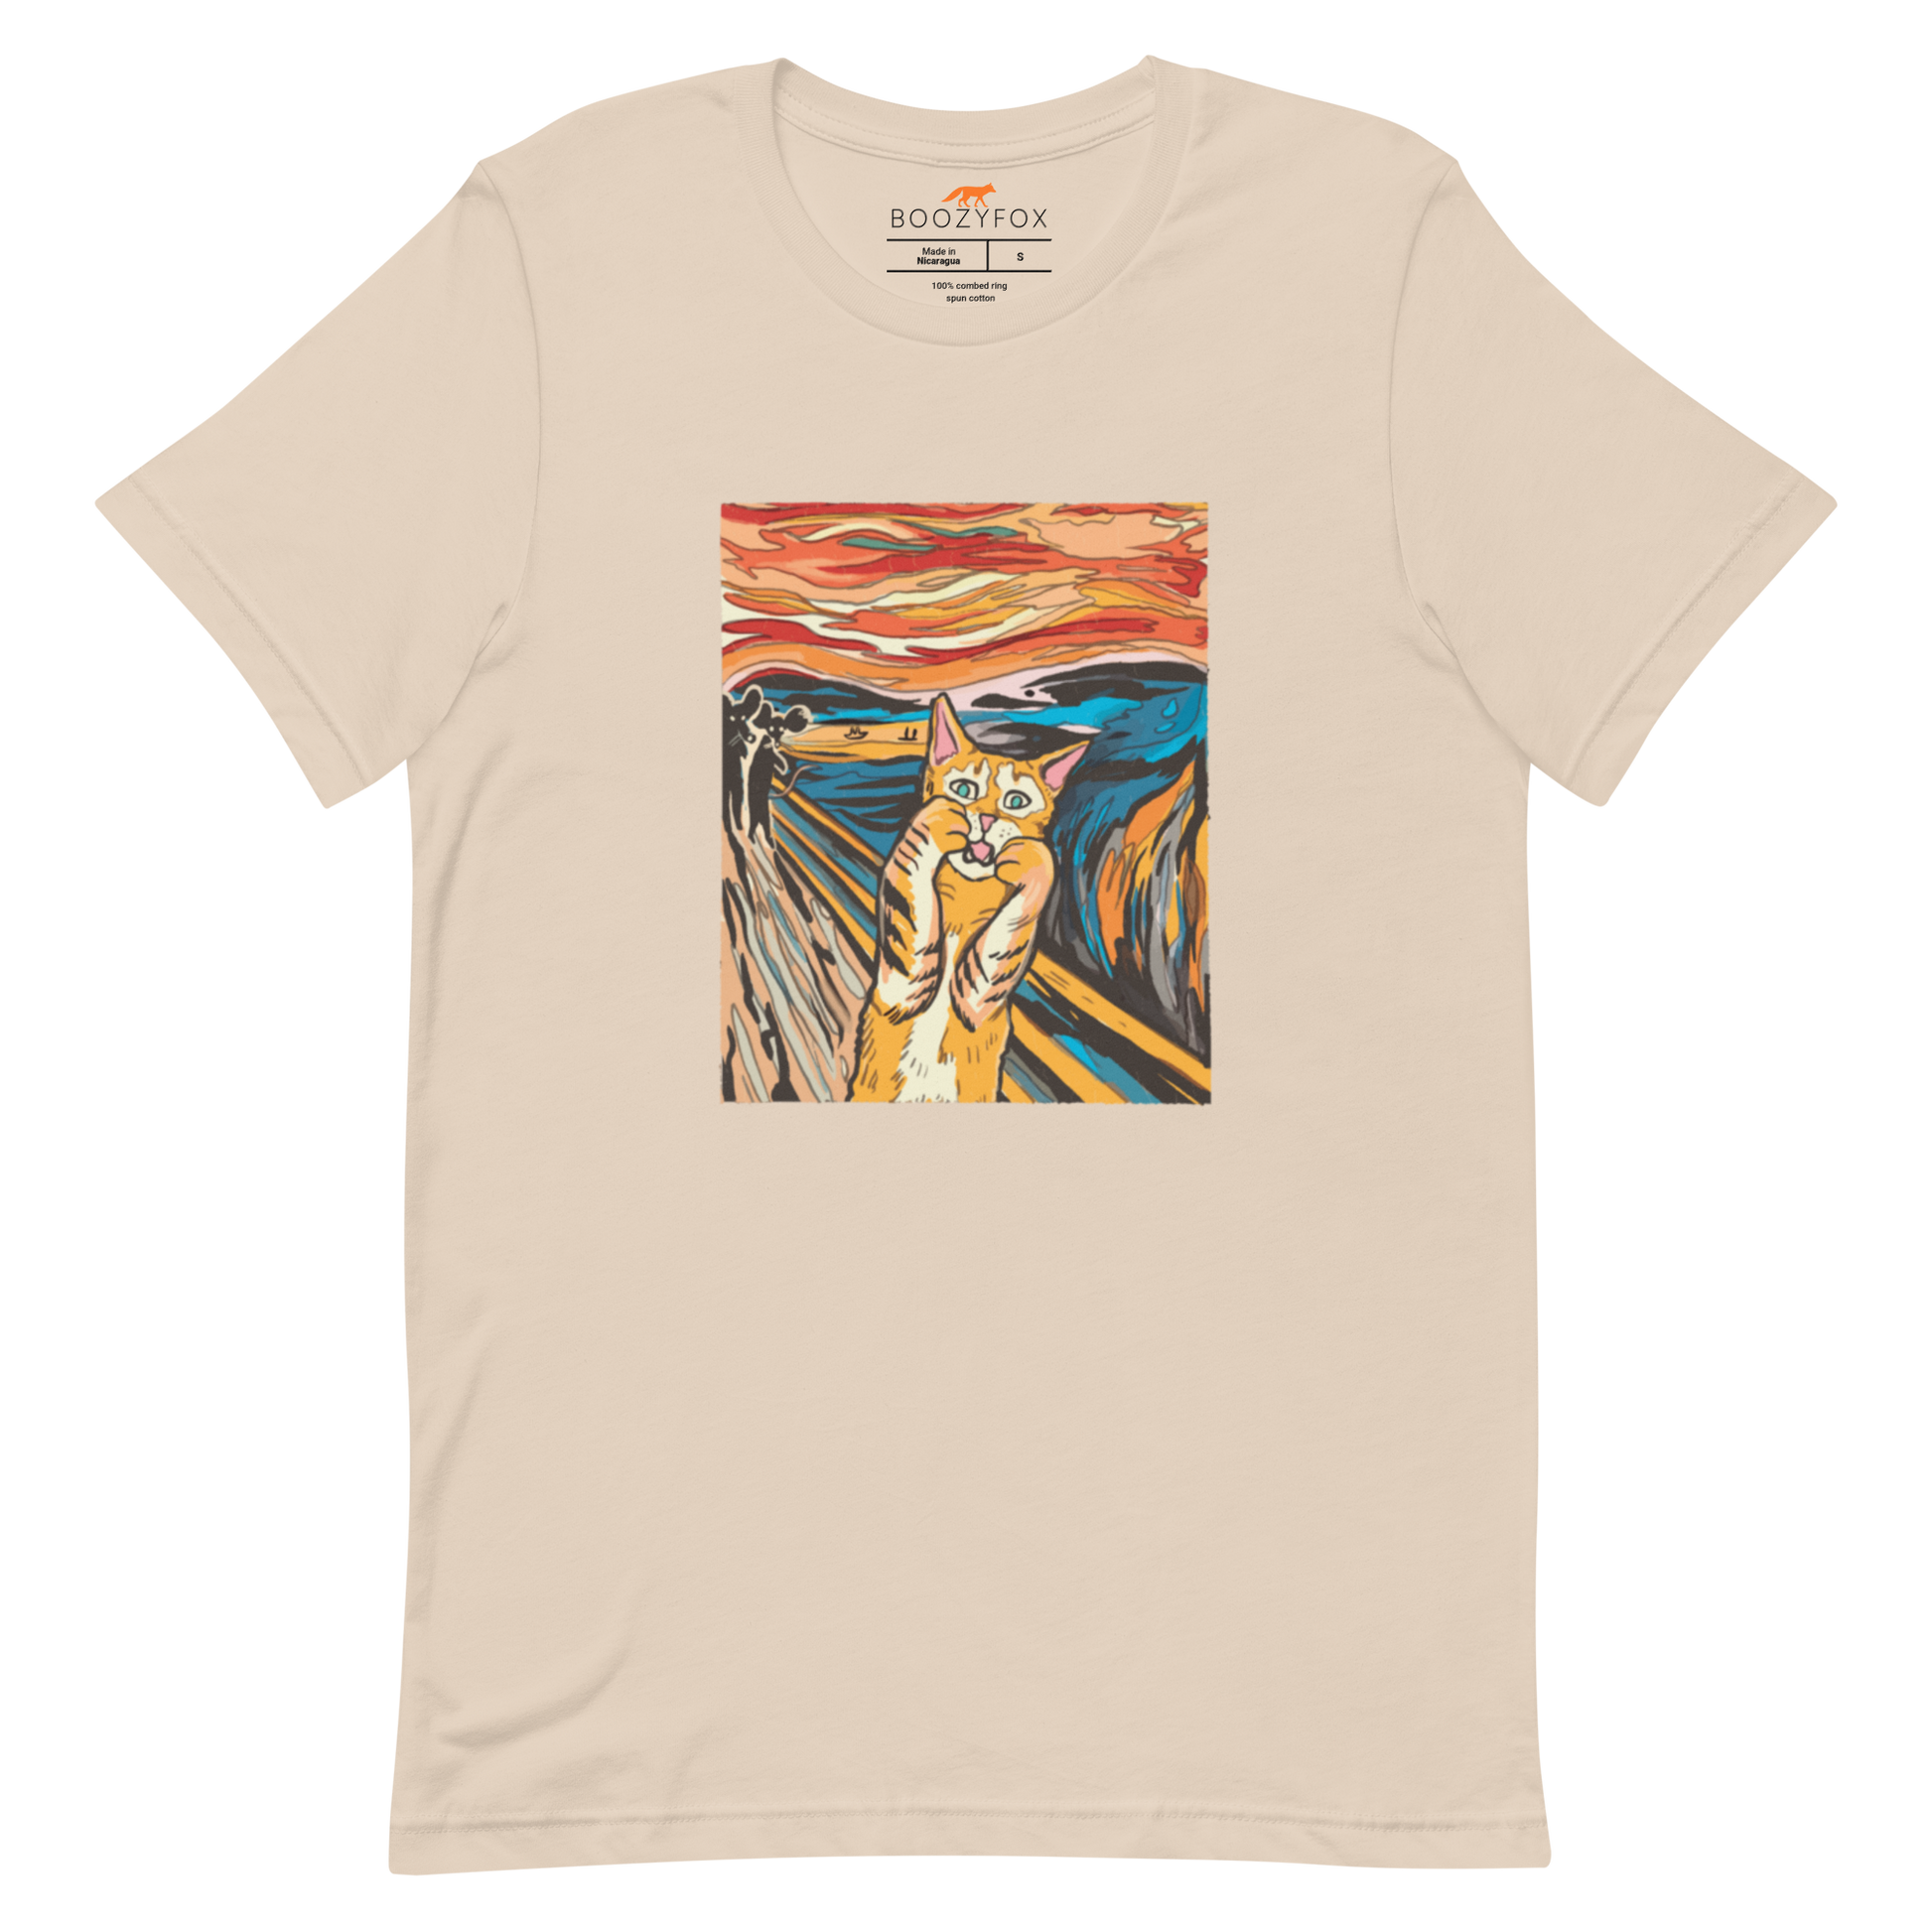 Soft Cream Premium Screaming Cat T-Shirt showcasing iconic The Screaming Cat graphic on the chest - Funny Graphic Cat Tees - Boozy Fox